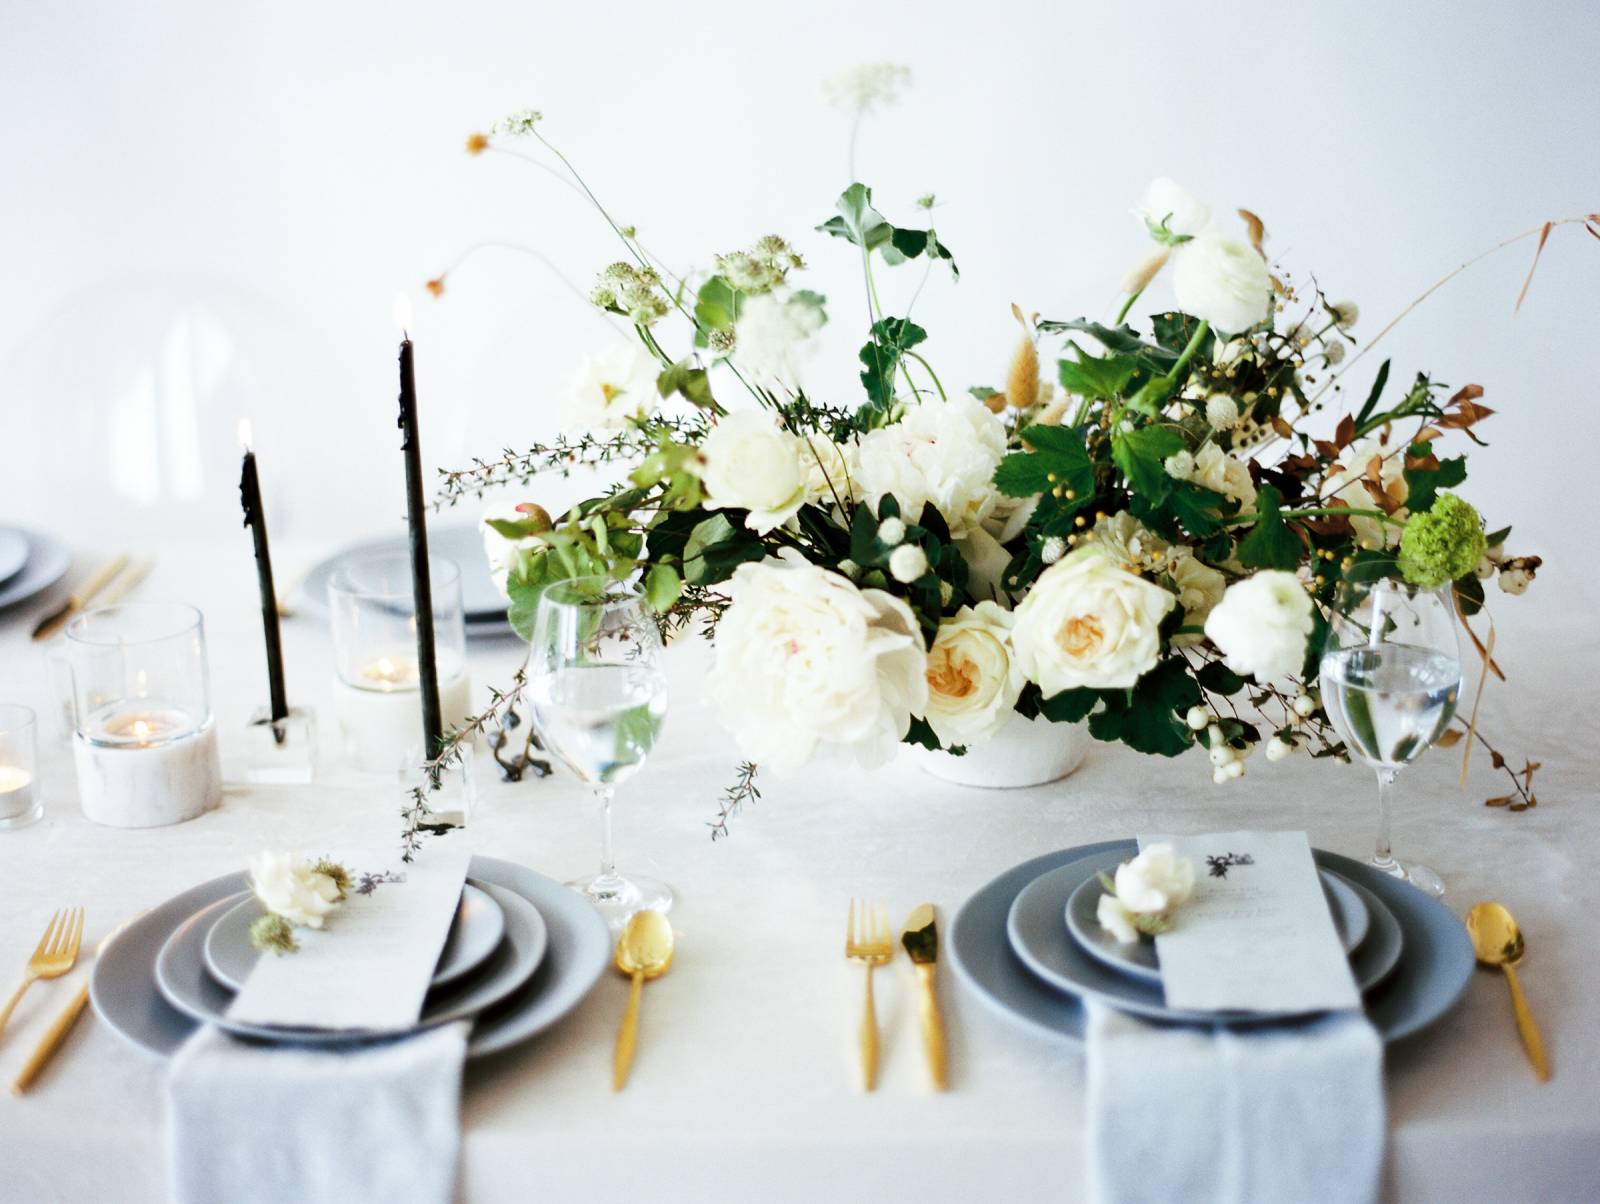 Minimalist bridal ideas Inspired by the tones of winter | San Diego ...